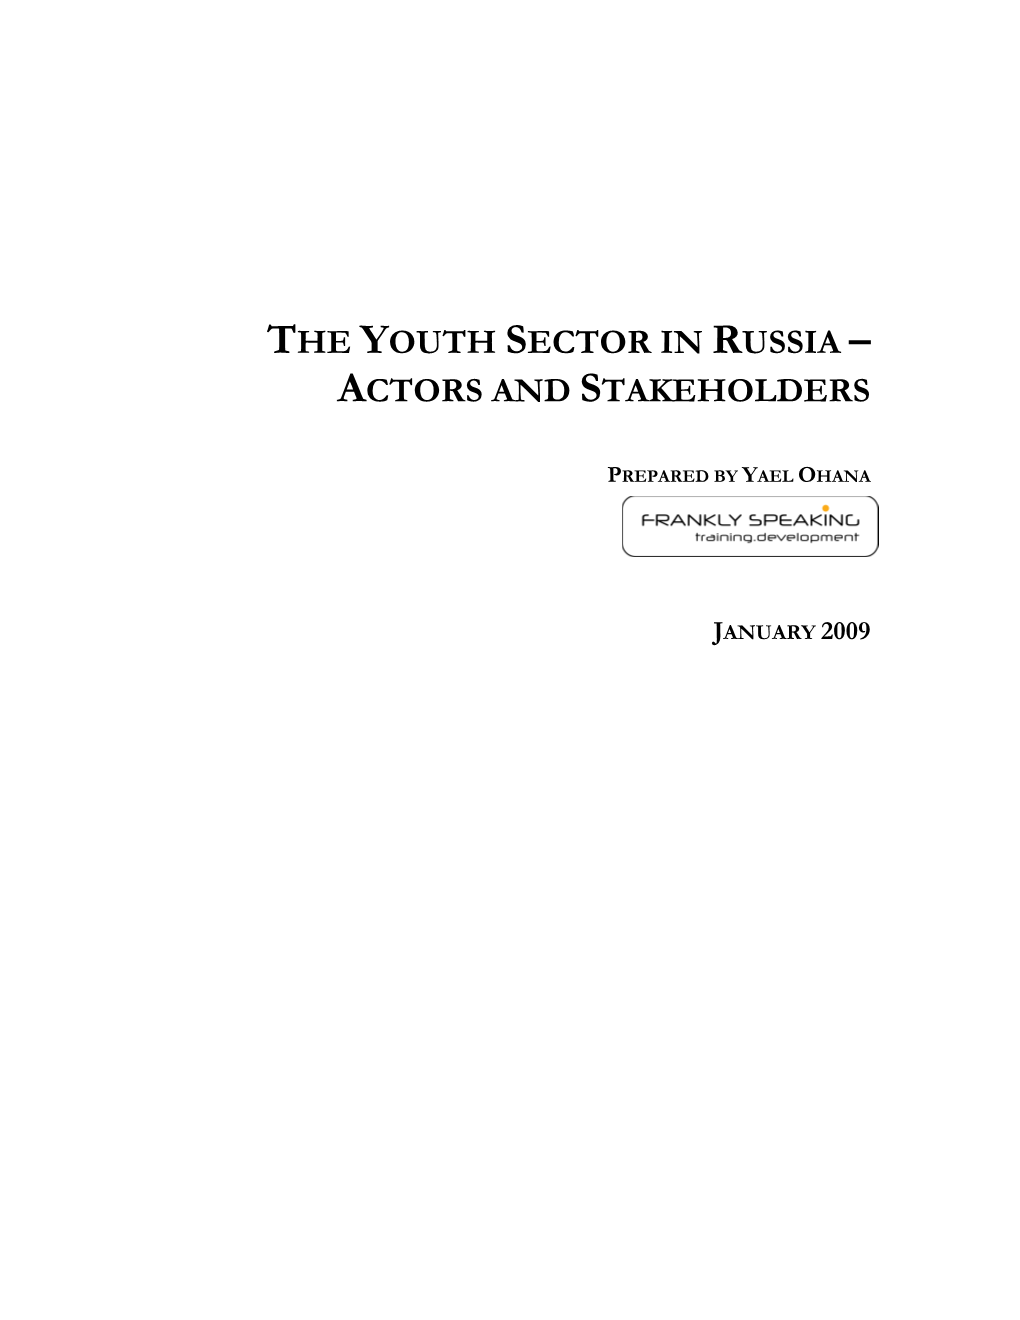 The Youth Sector in Russia – Actors and Stakeholders